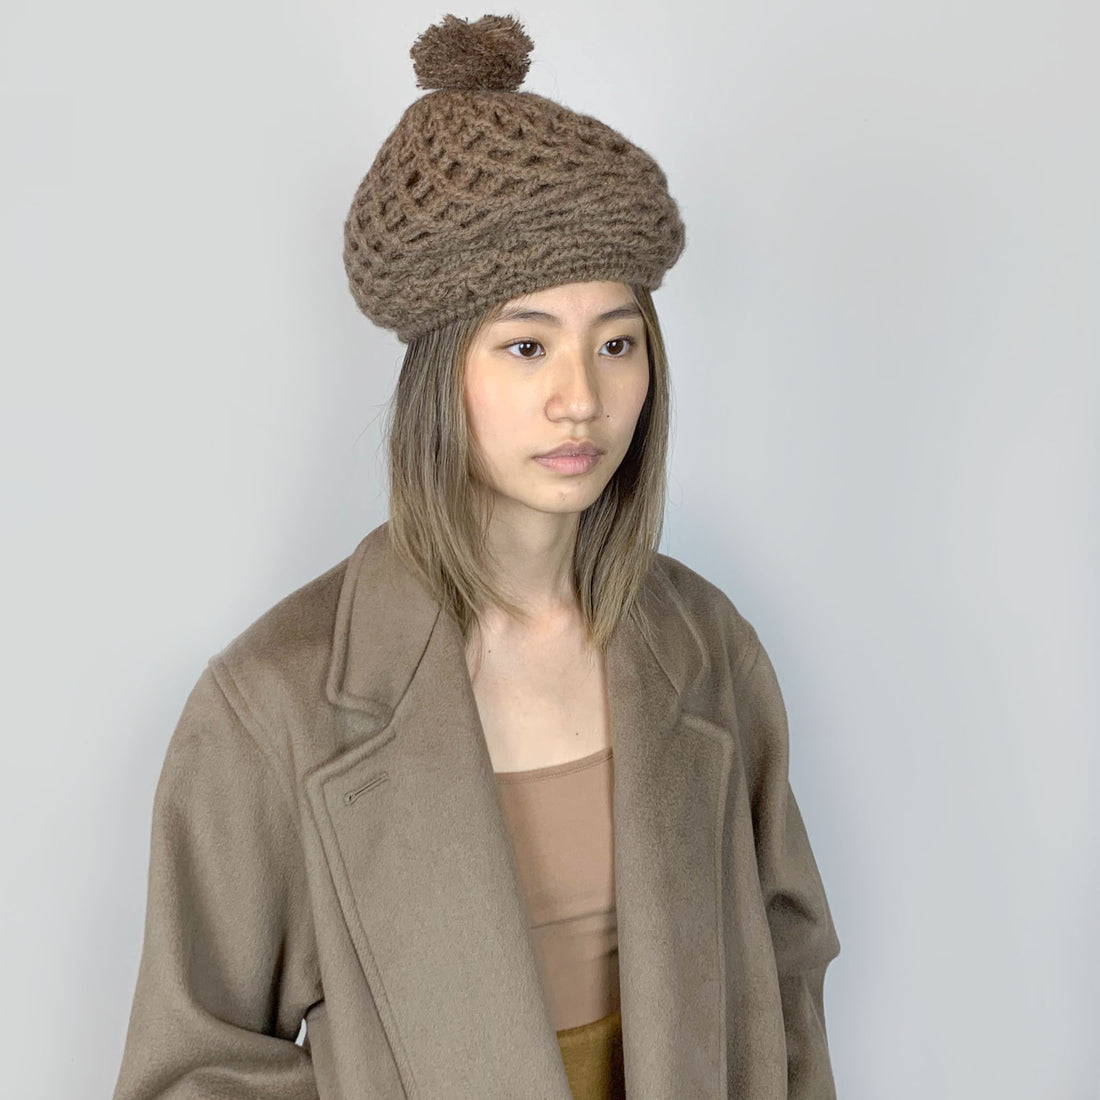 70s Taupe Knit Beret